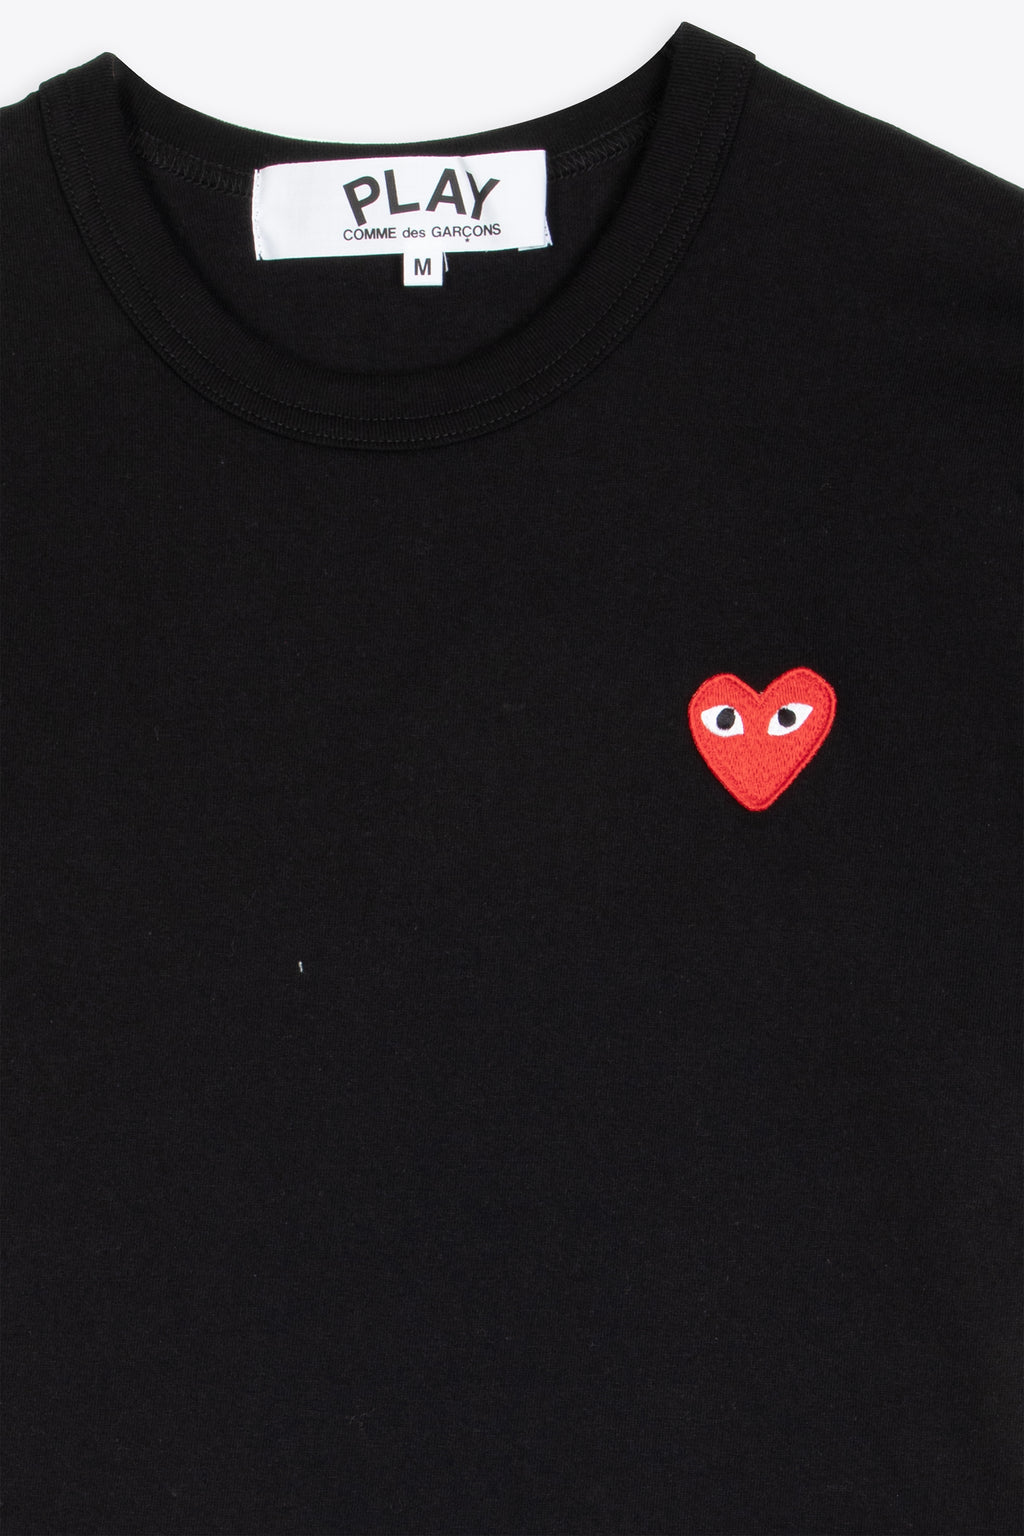 alt-image__Black-cotton-t-shirt-with-red-heart-patch-at-chest